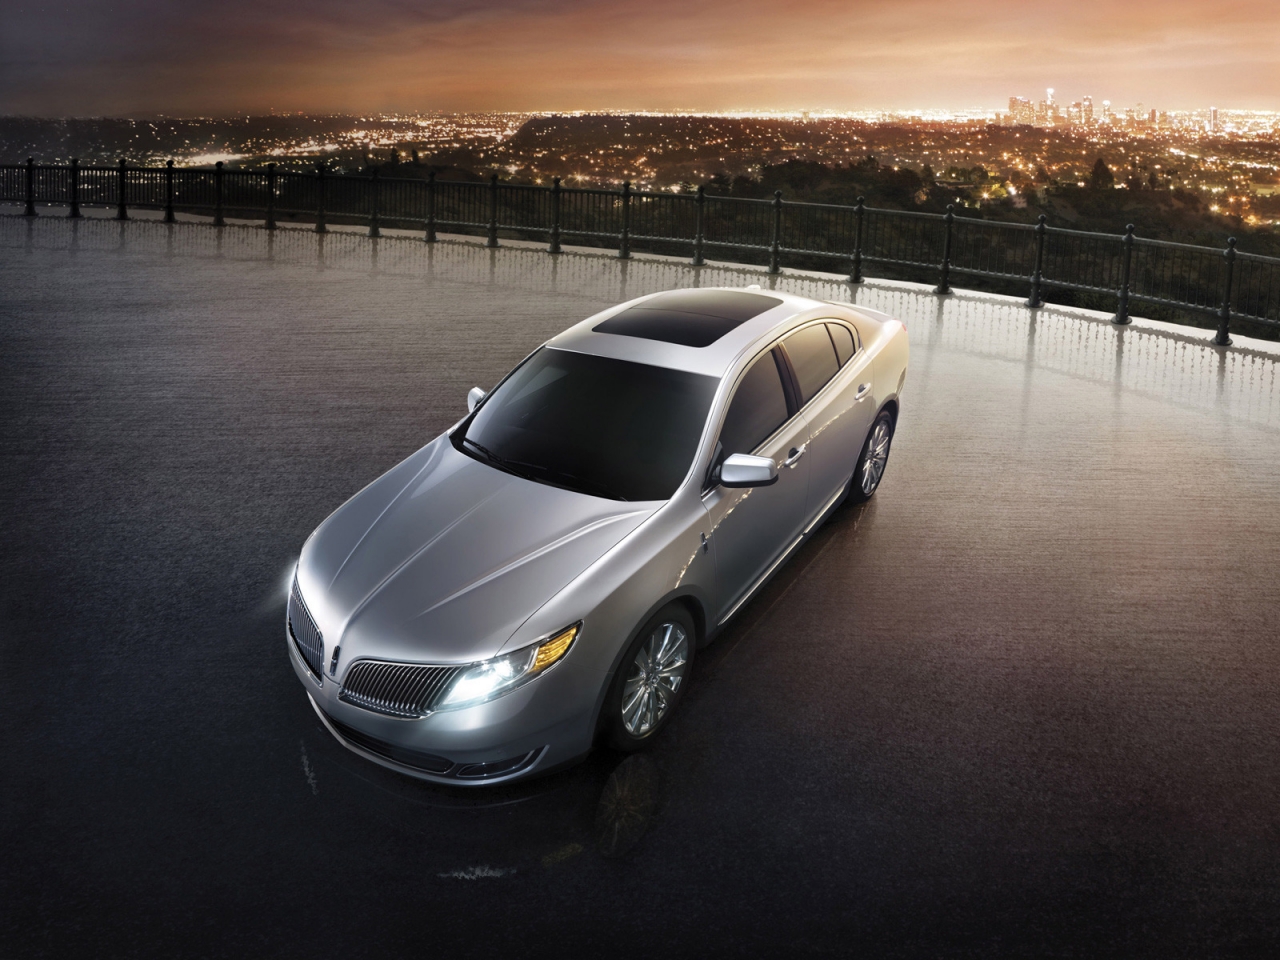 2013 Lincoln MKS for 1280 x 960 resolution